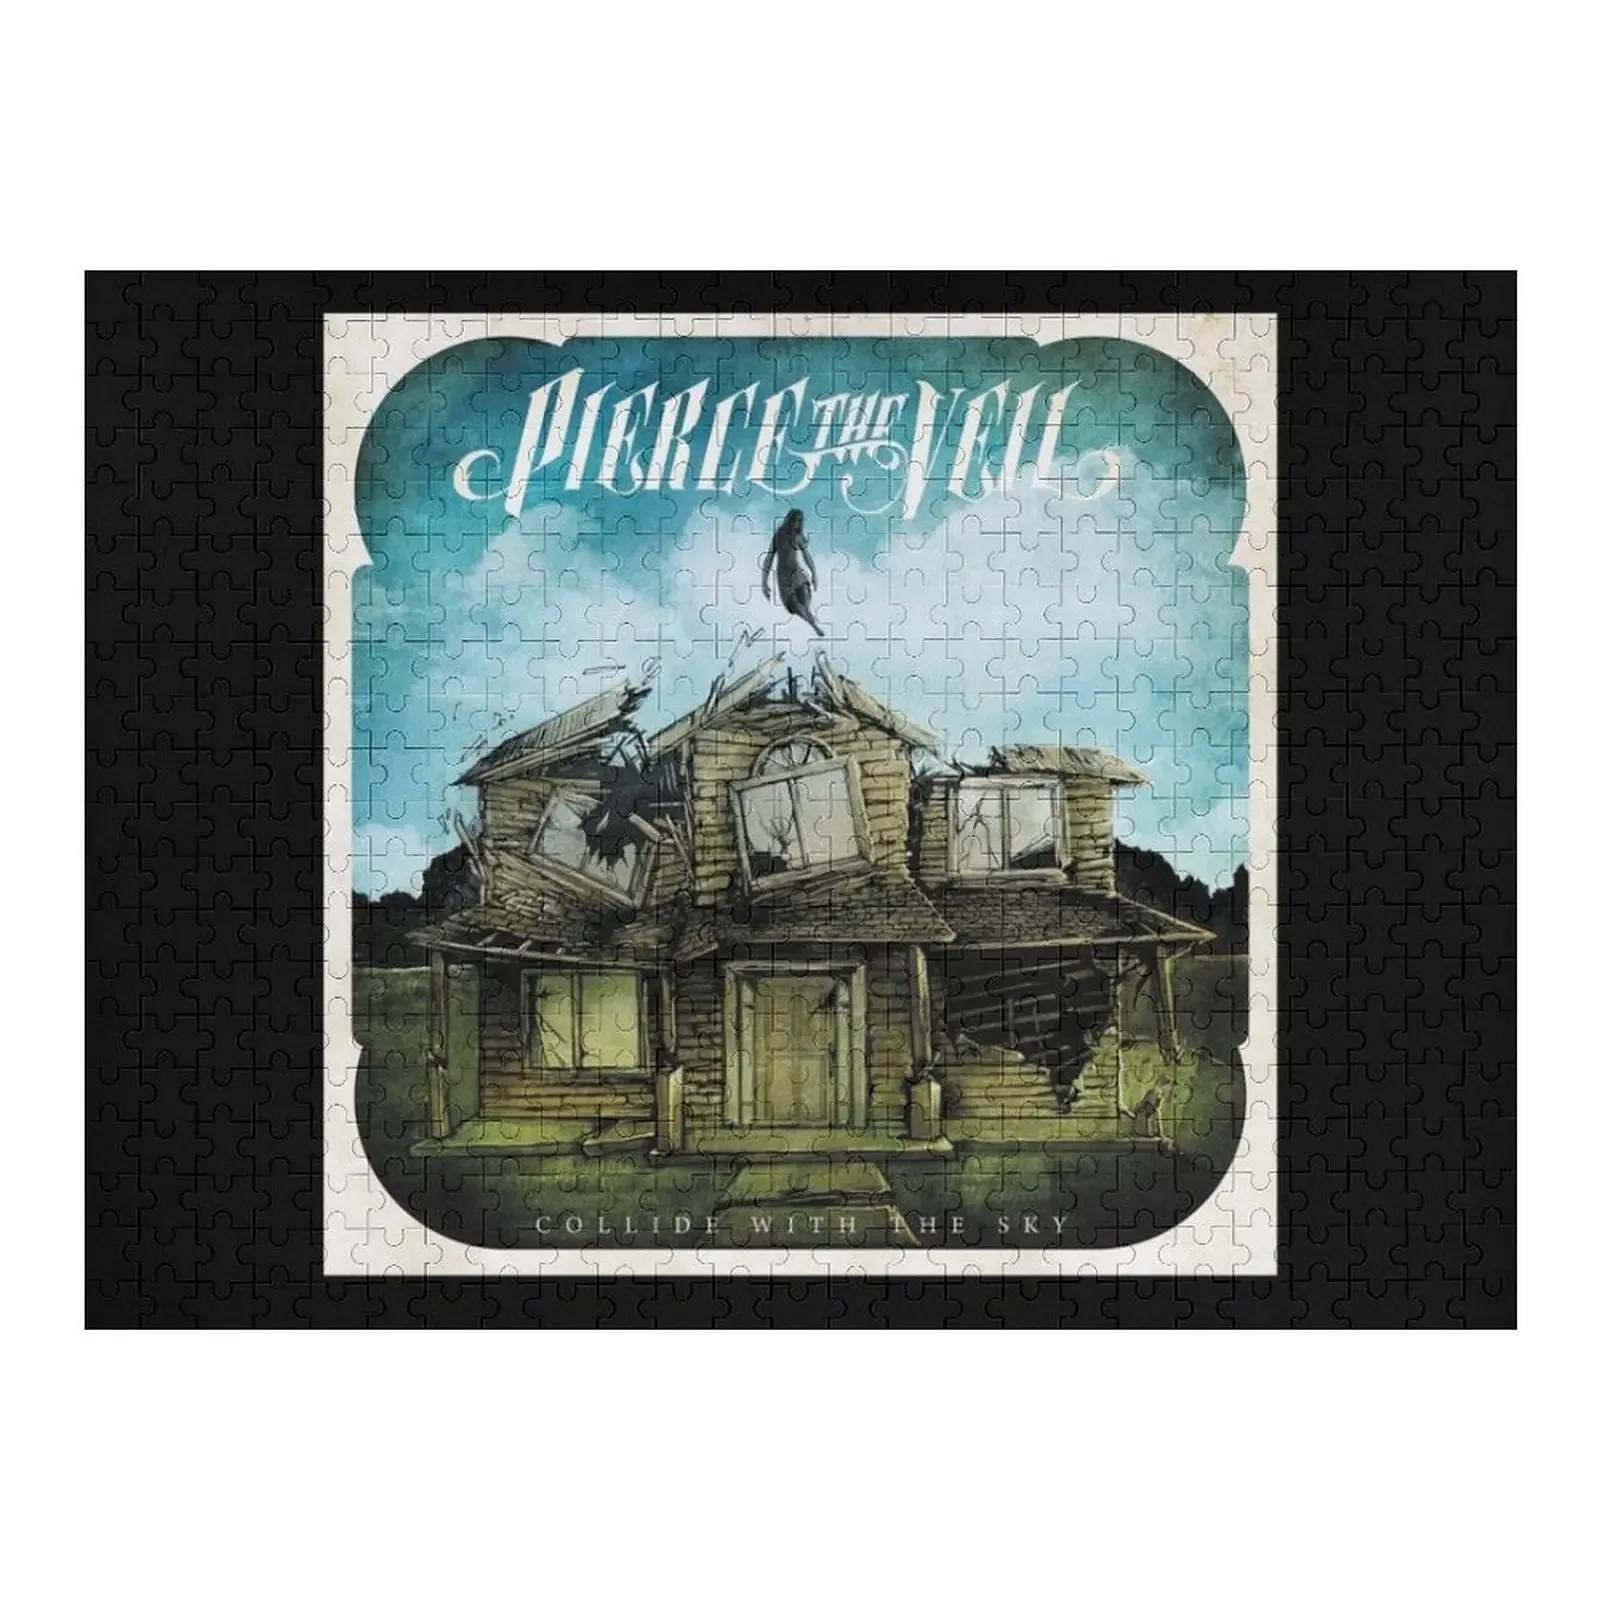 Pierce the Veil collide with the sky Jigsaw Puzzle Iq Wooden Adults Puzzle mmq m07 pencil edge wedding veil with comb 3 tiers off white colored face cover bridal veil white bride accessories